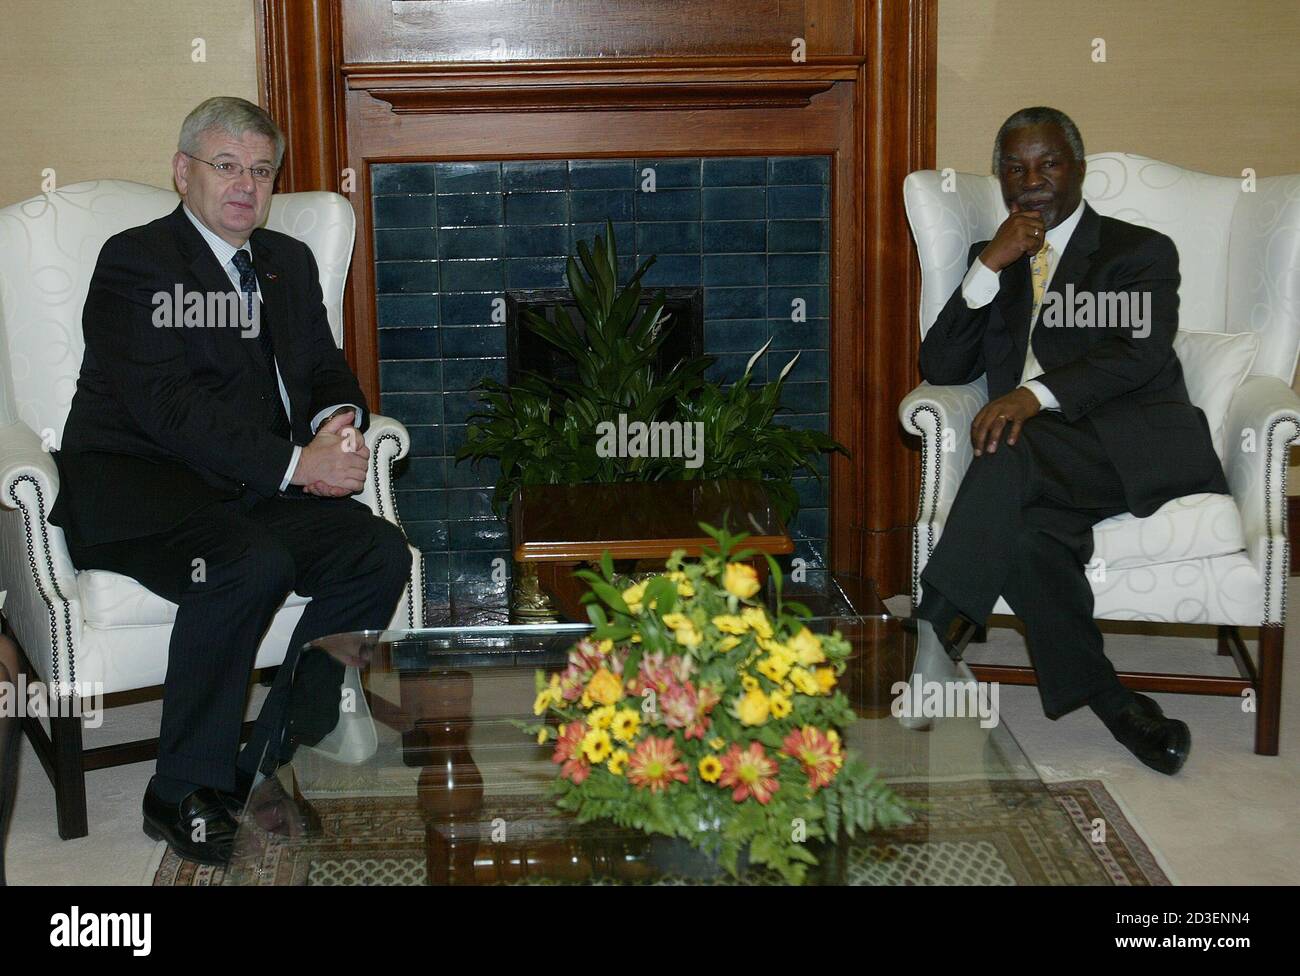 South African President Thabo Mbeki (R) sits with Joschka Fischer (L) Vice-Chancellor of Germany after their meeting at the Union Building in Pretoria October 31,2003.Fischer is on two-days official visits to South Africa.REUTERS/Juda Ngwenya REUTERS  JN/ Stock Photo